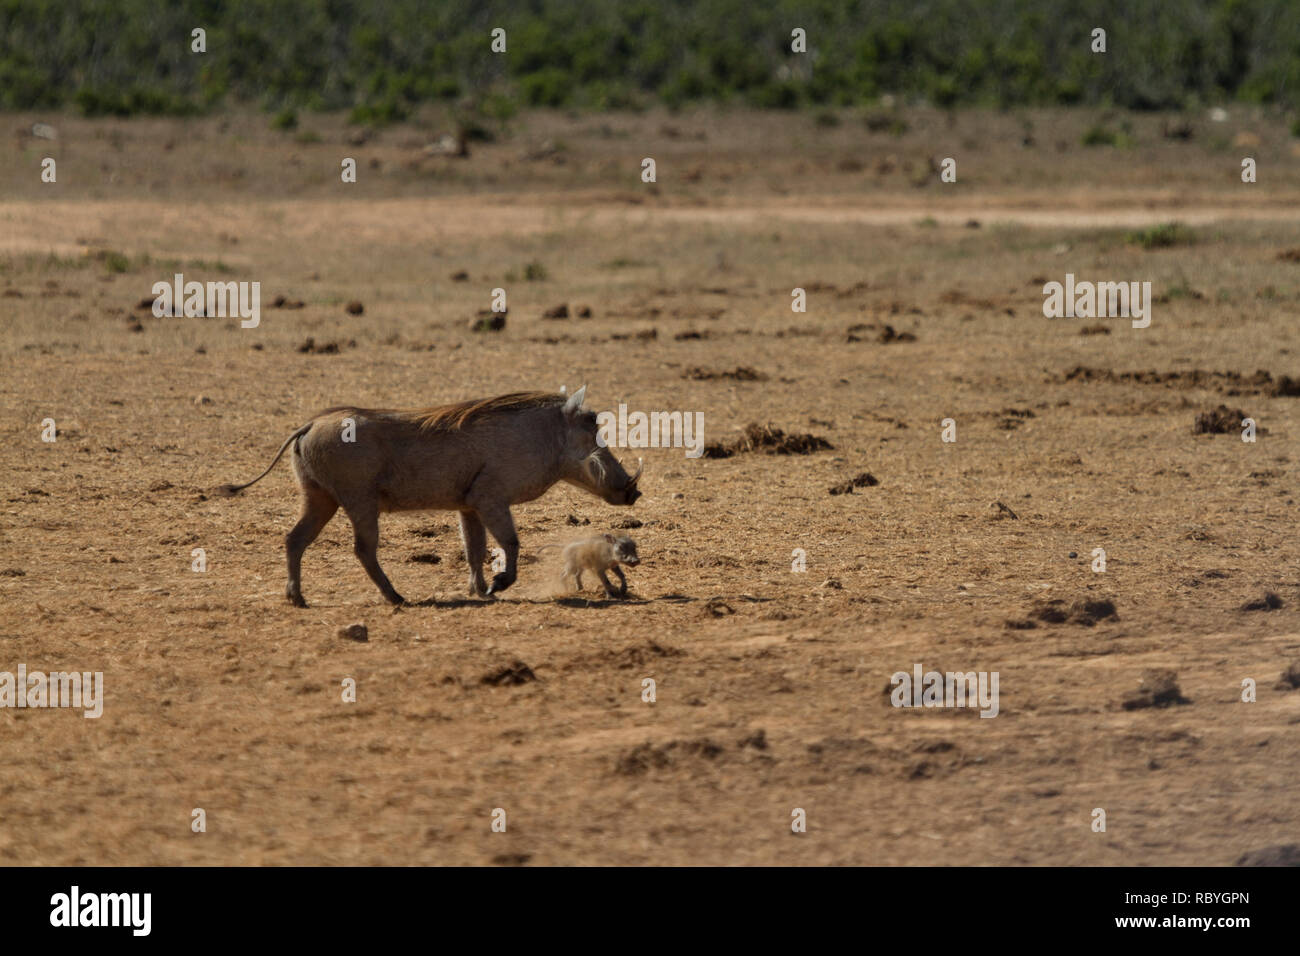 Warthog (Phacochoerus africanus) mother and baby, Addo Elephant National Park, South Africa Stock Photo